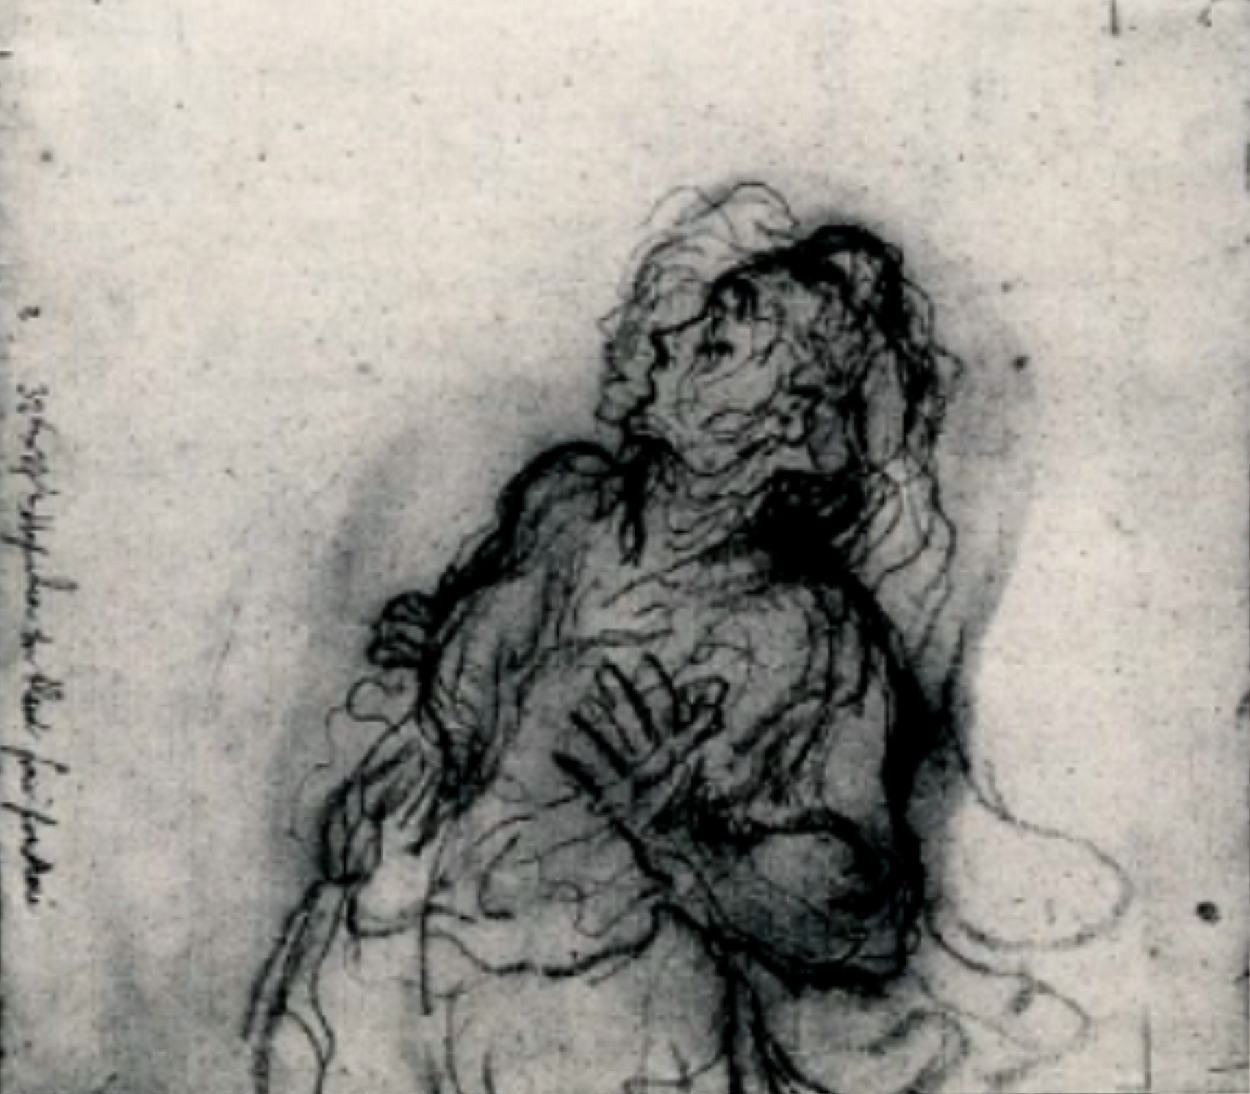 Fright by August Daumier